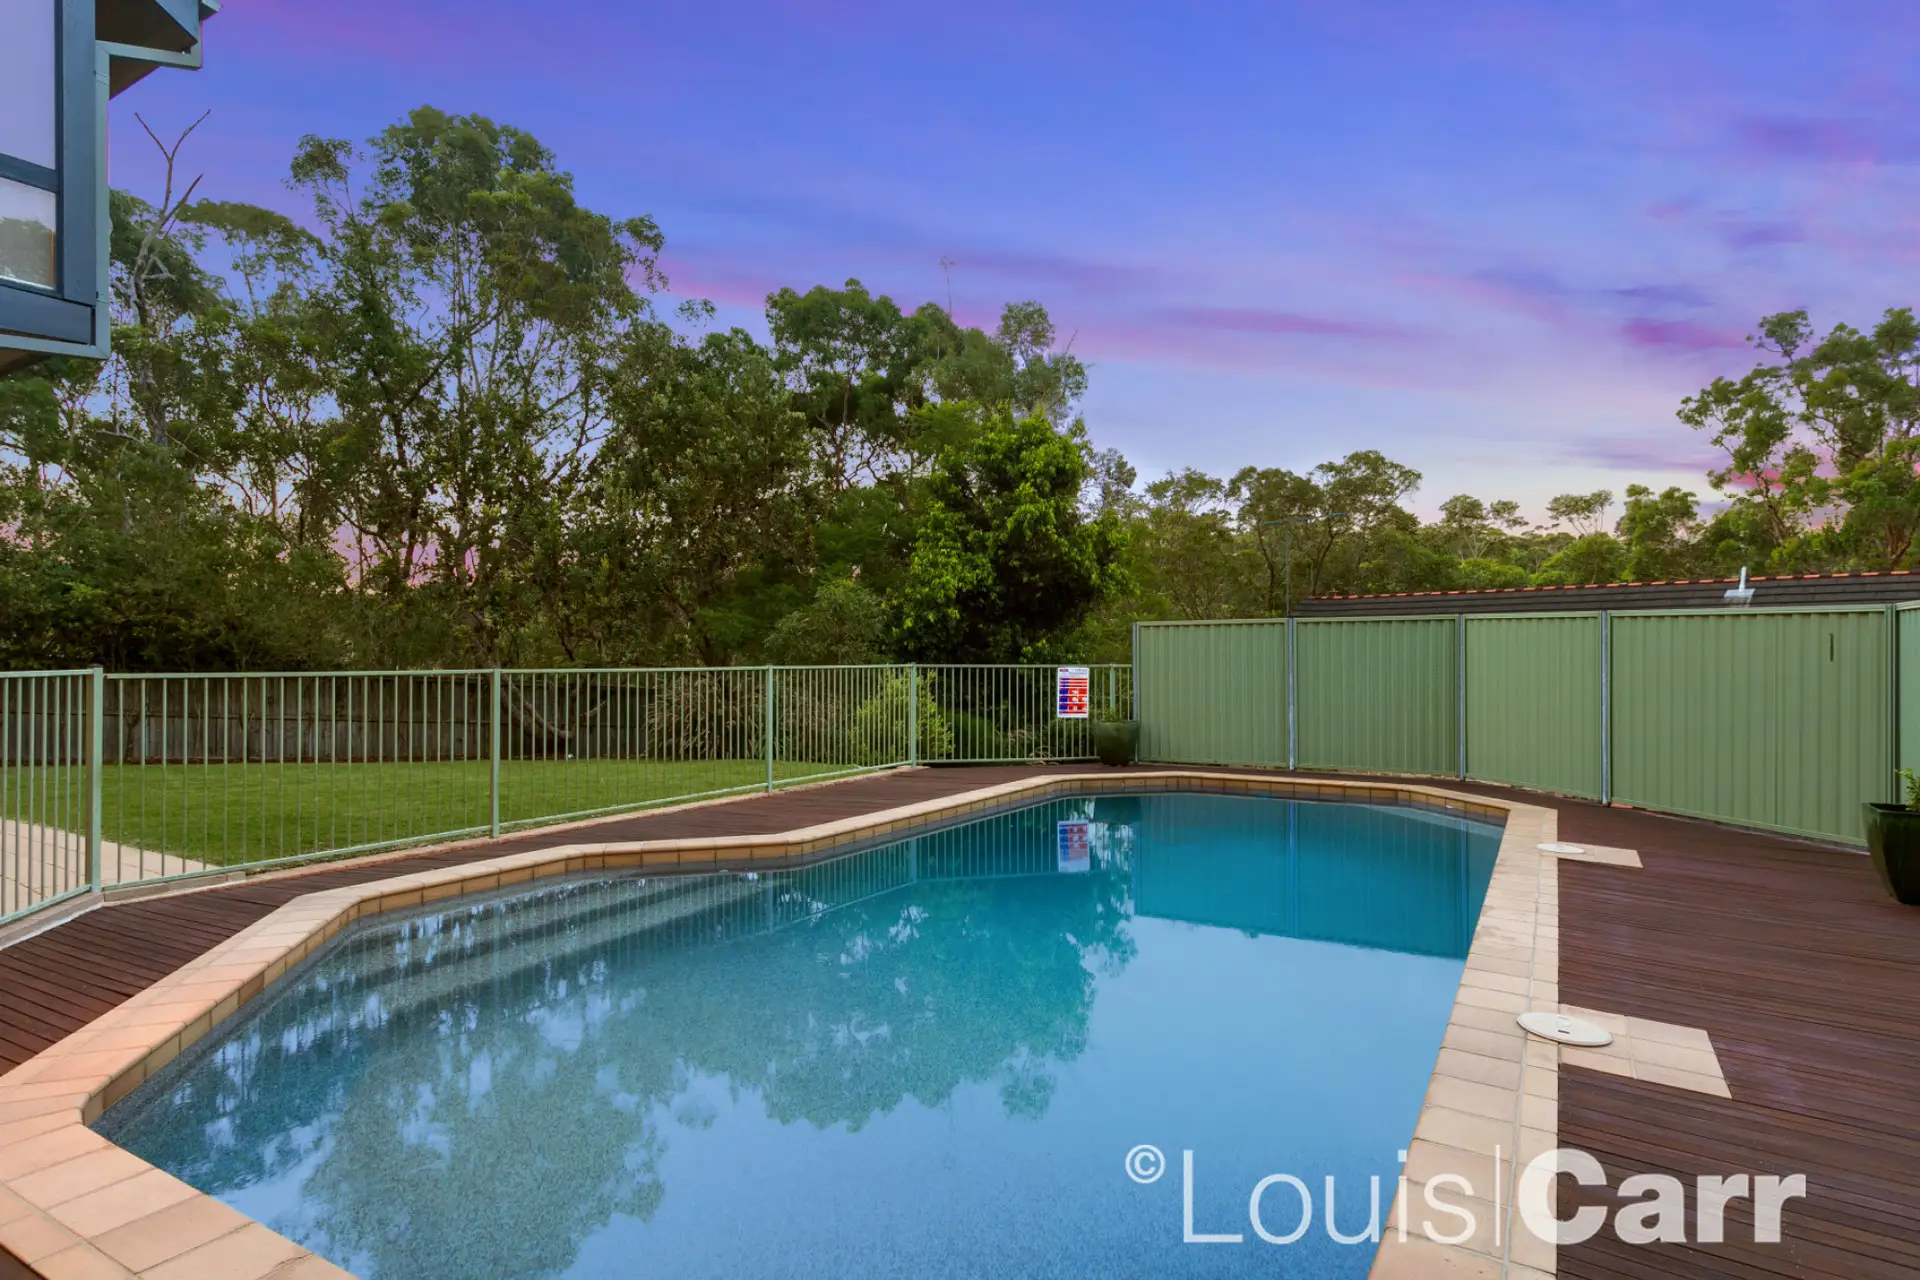 Photo #12: 8 Keith Court, Cherrybrook - Sold by Louis Carr Real Estate